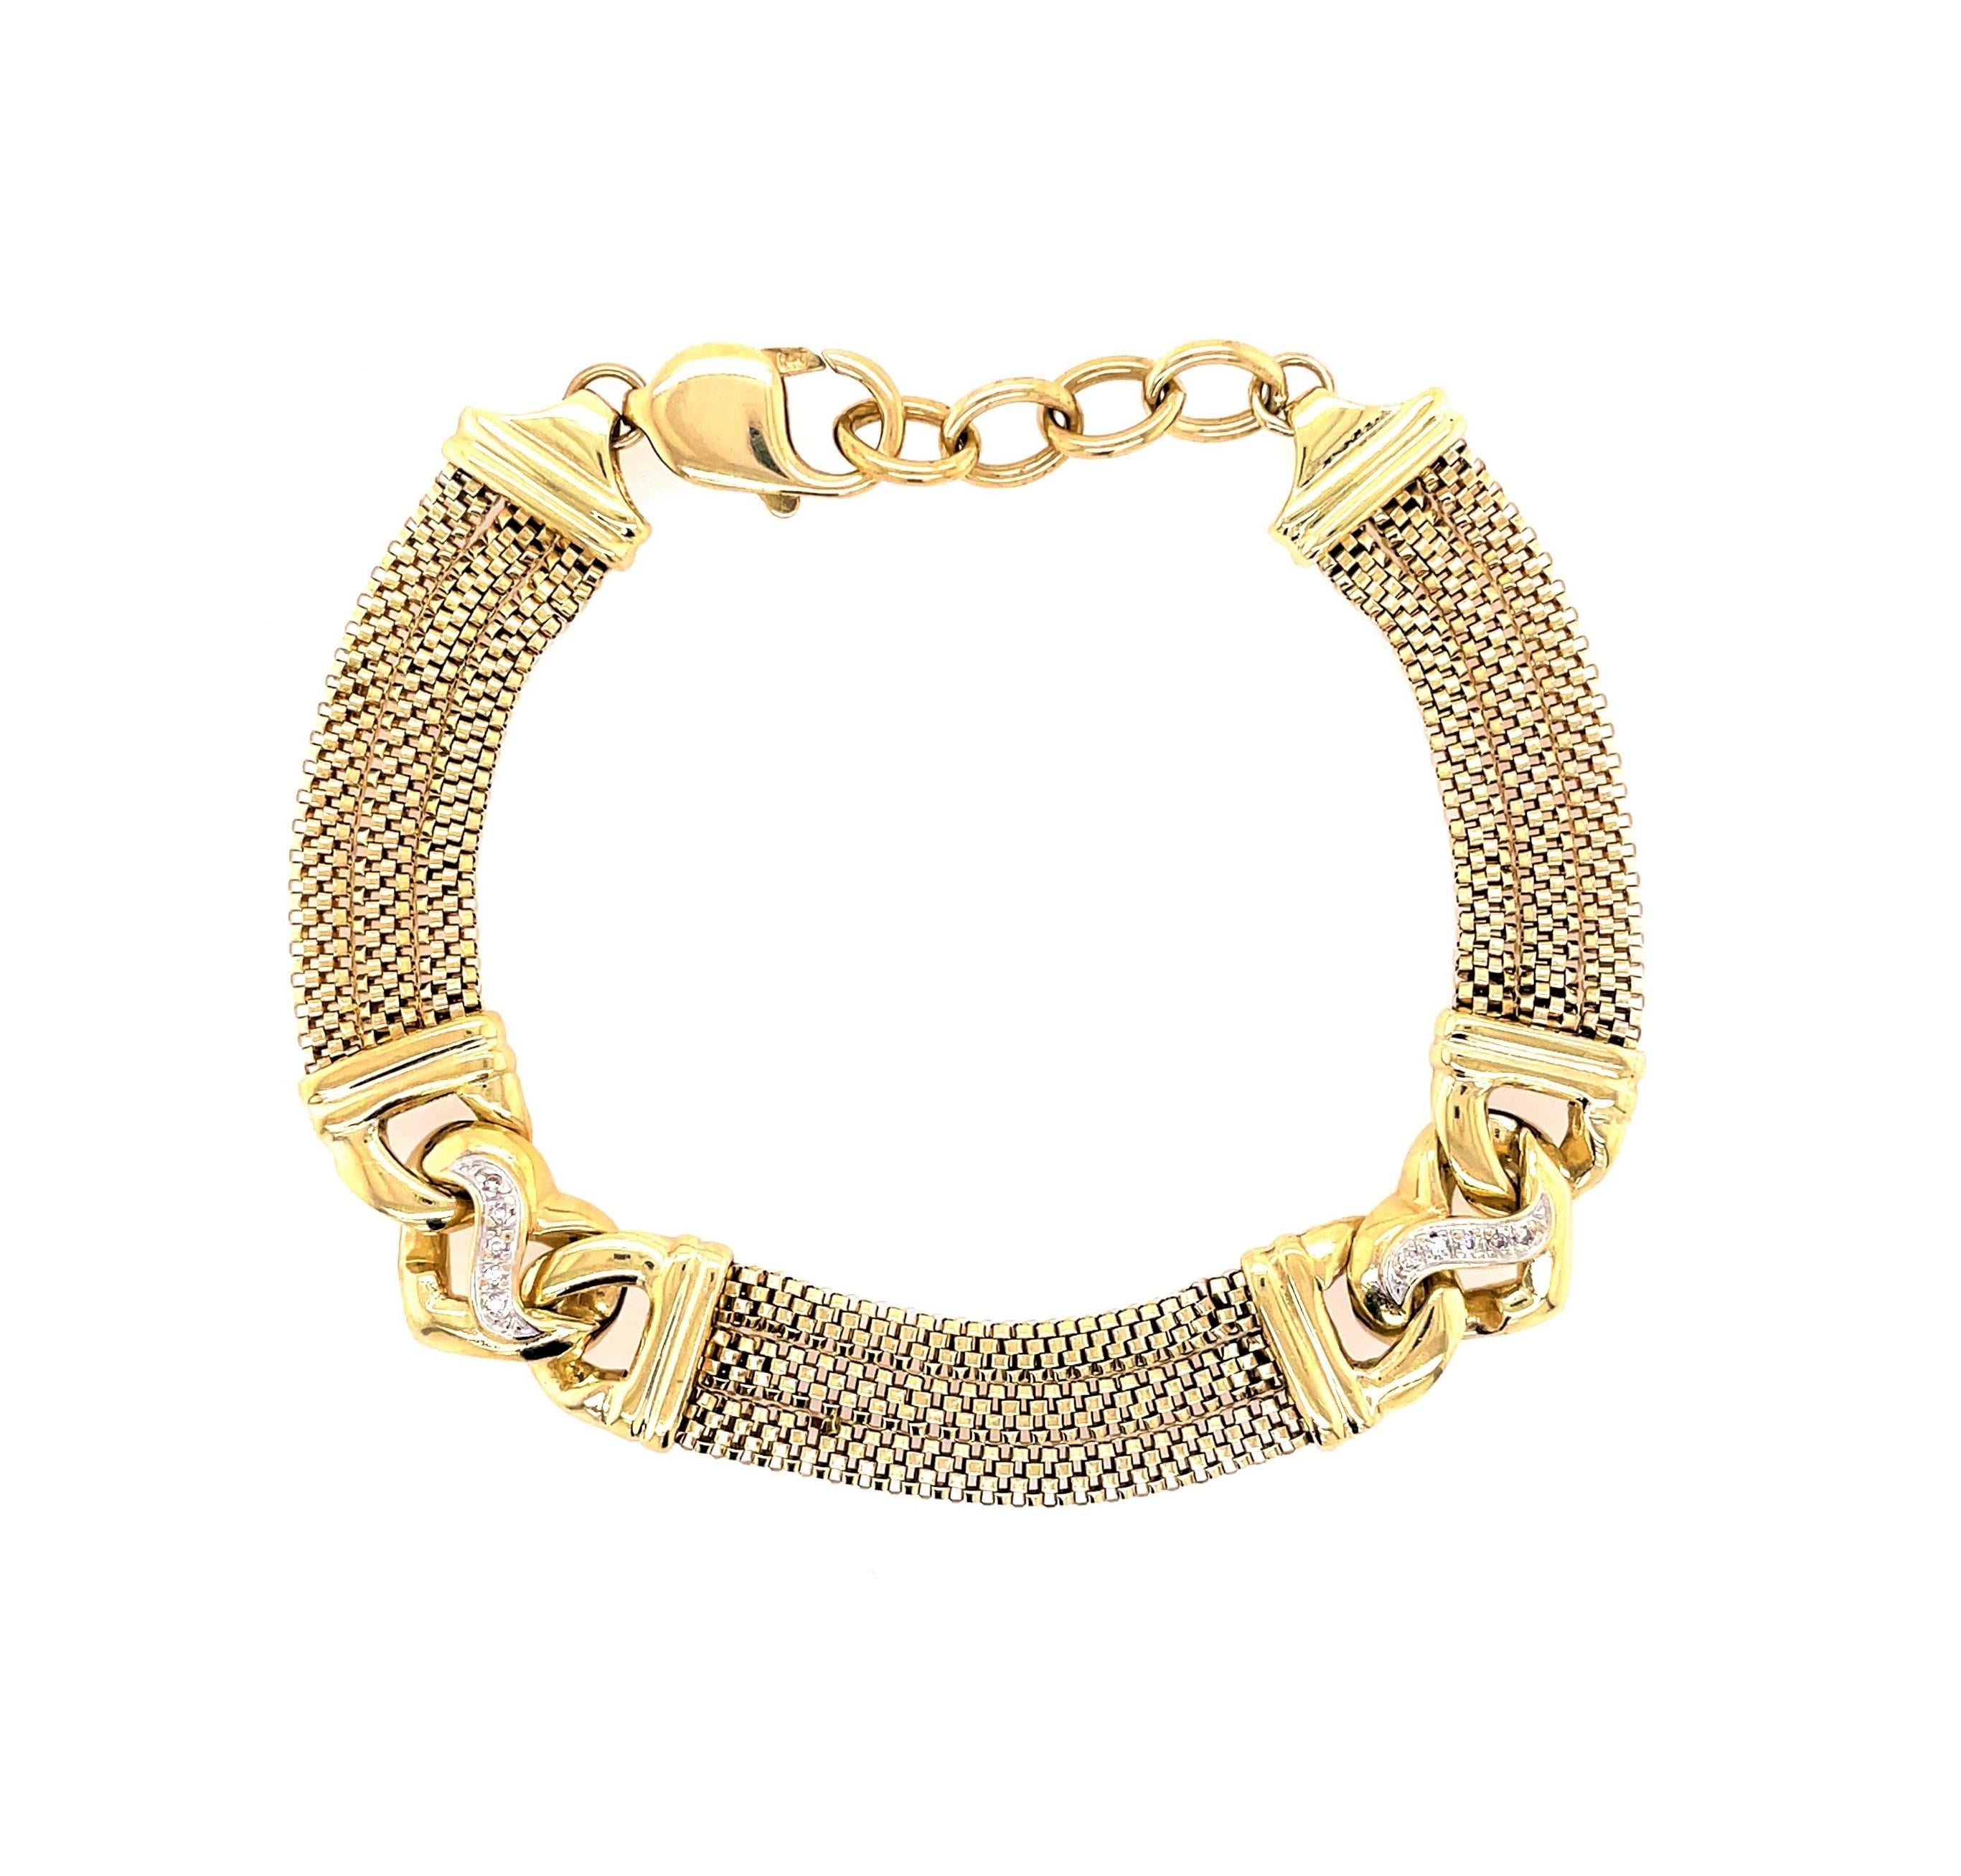 Triple 14 karat yellow gold mesh chains create this adorable bracelet linked with two decorative stations of stylish gold hearts each accented with five .01 round diamonds for a little added sparkle. Great for large wrists, this bracelet  is a